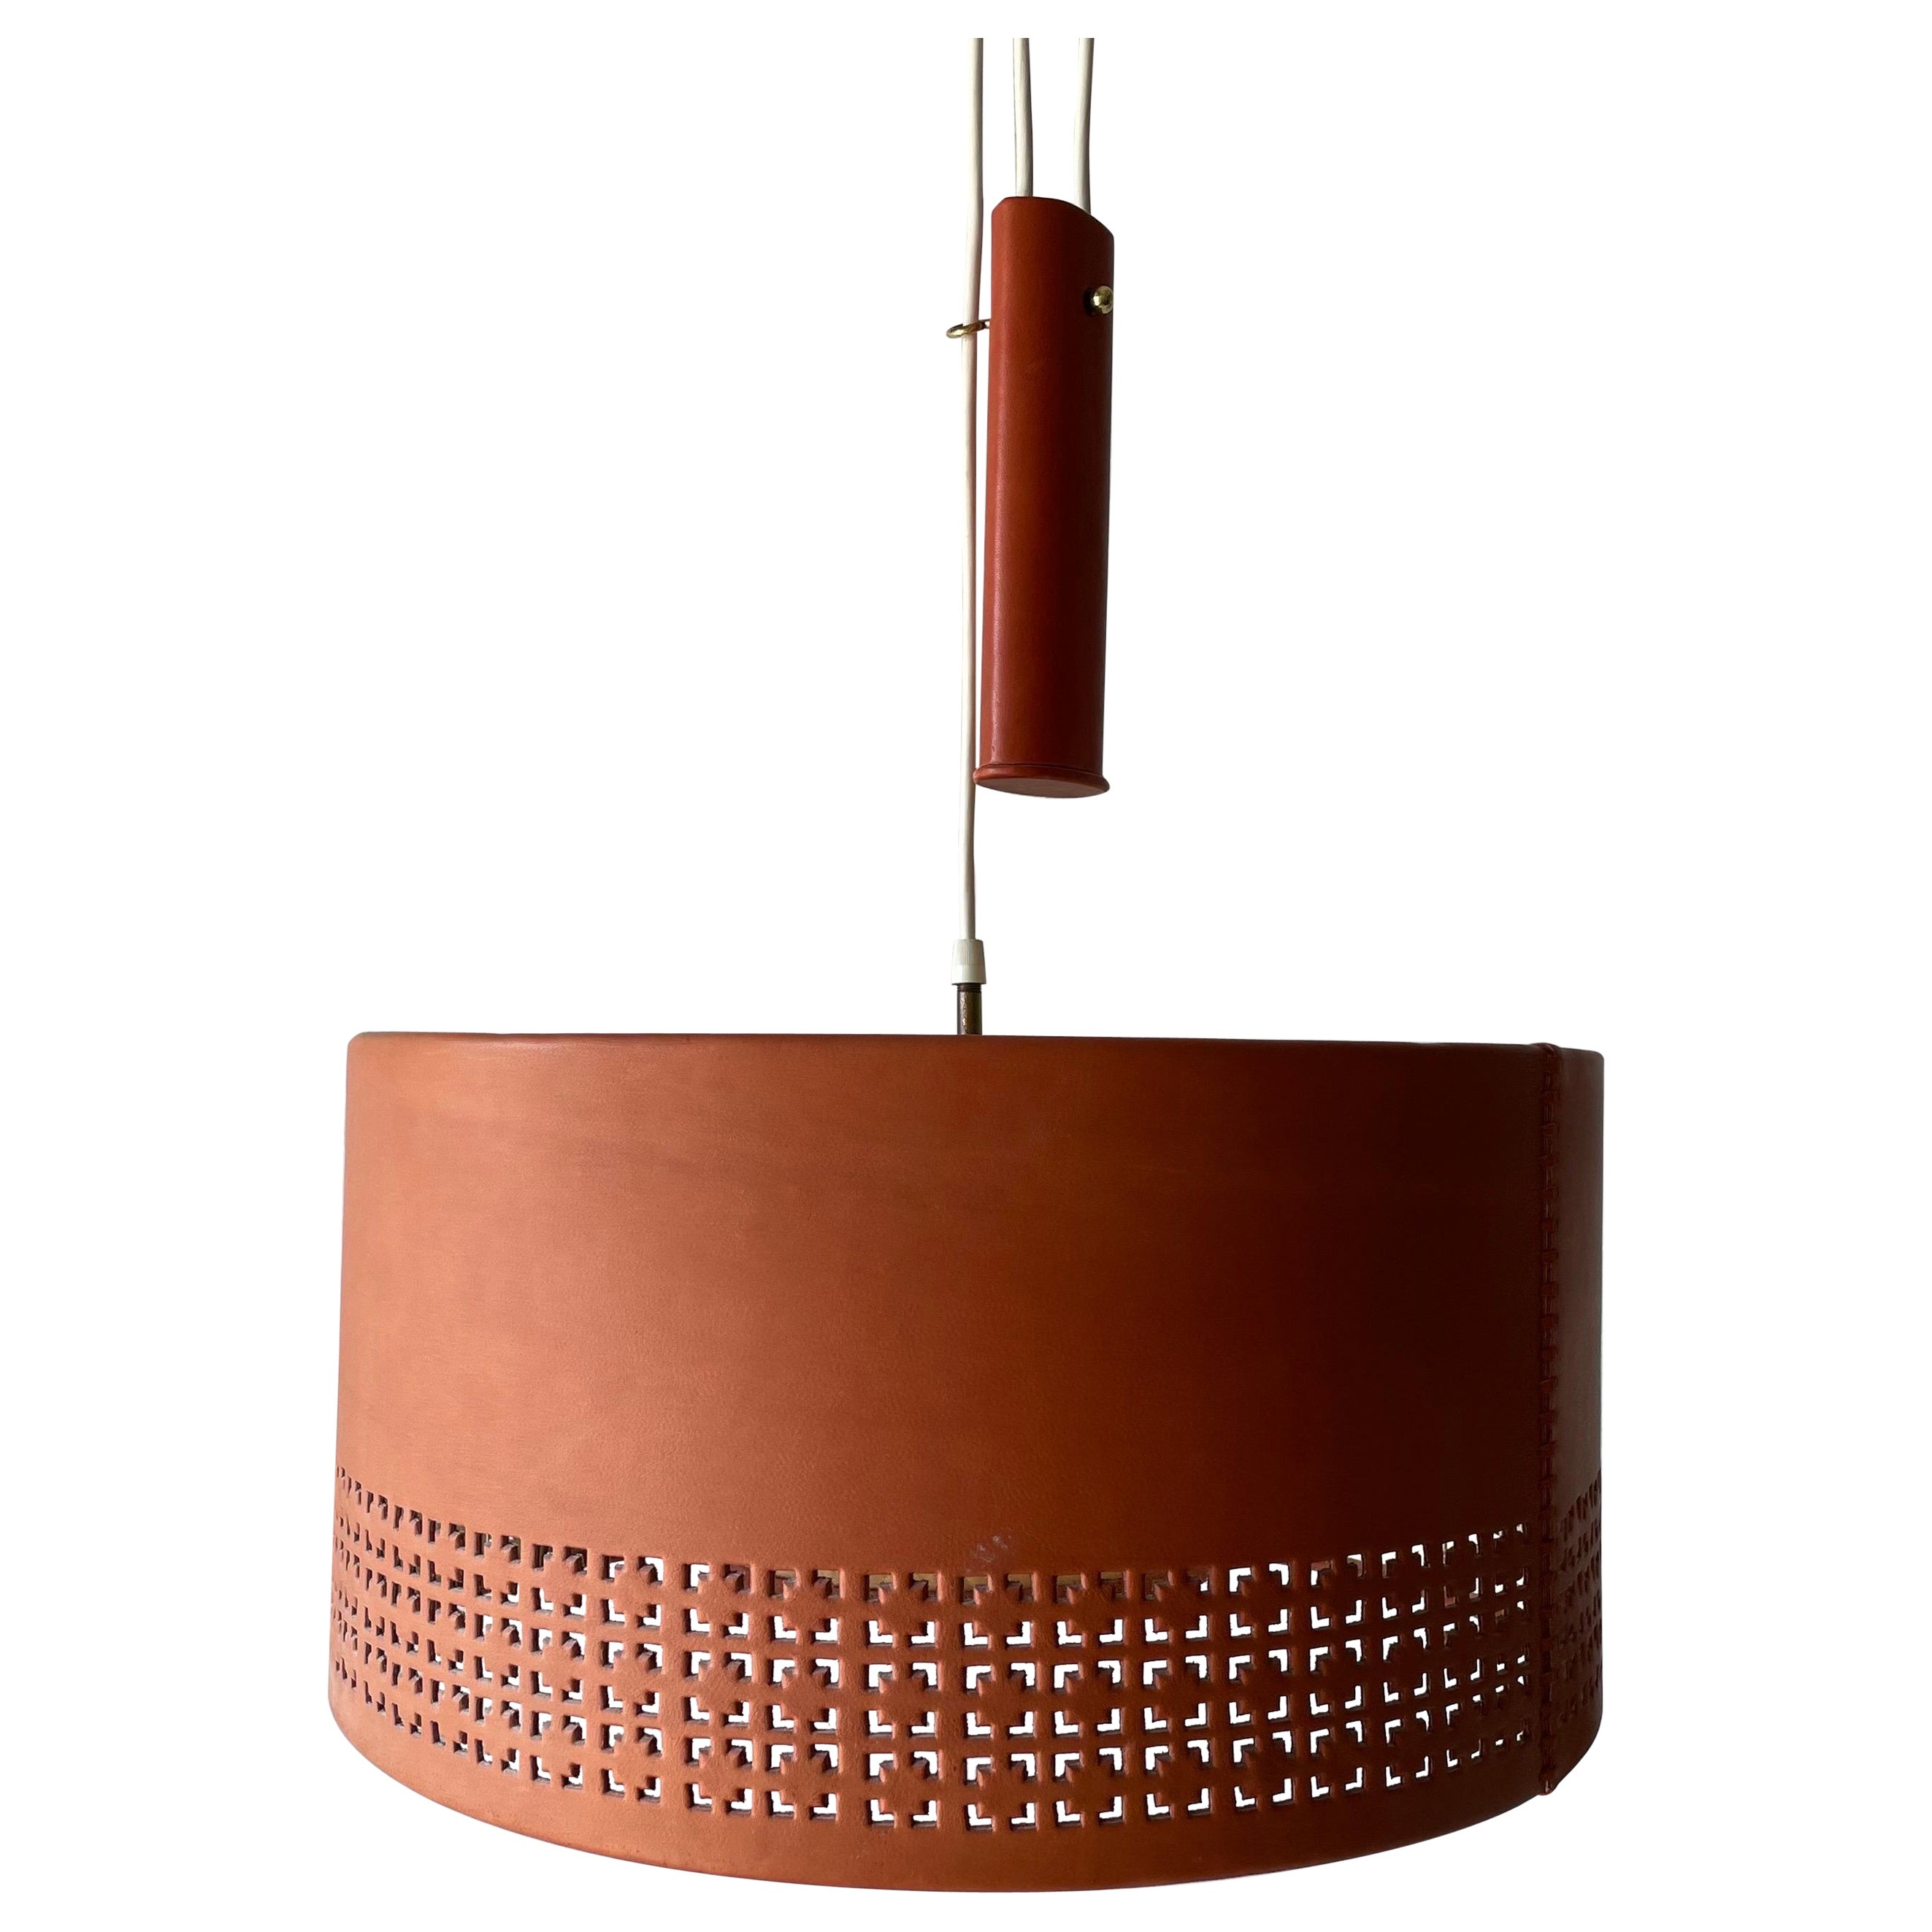 Cylindrical Leather Shade with Motifs Counterweight Pendant Lamp, 1960s, Germany For Sale